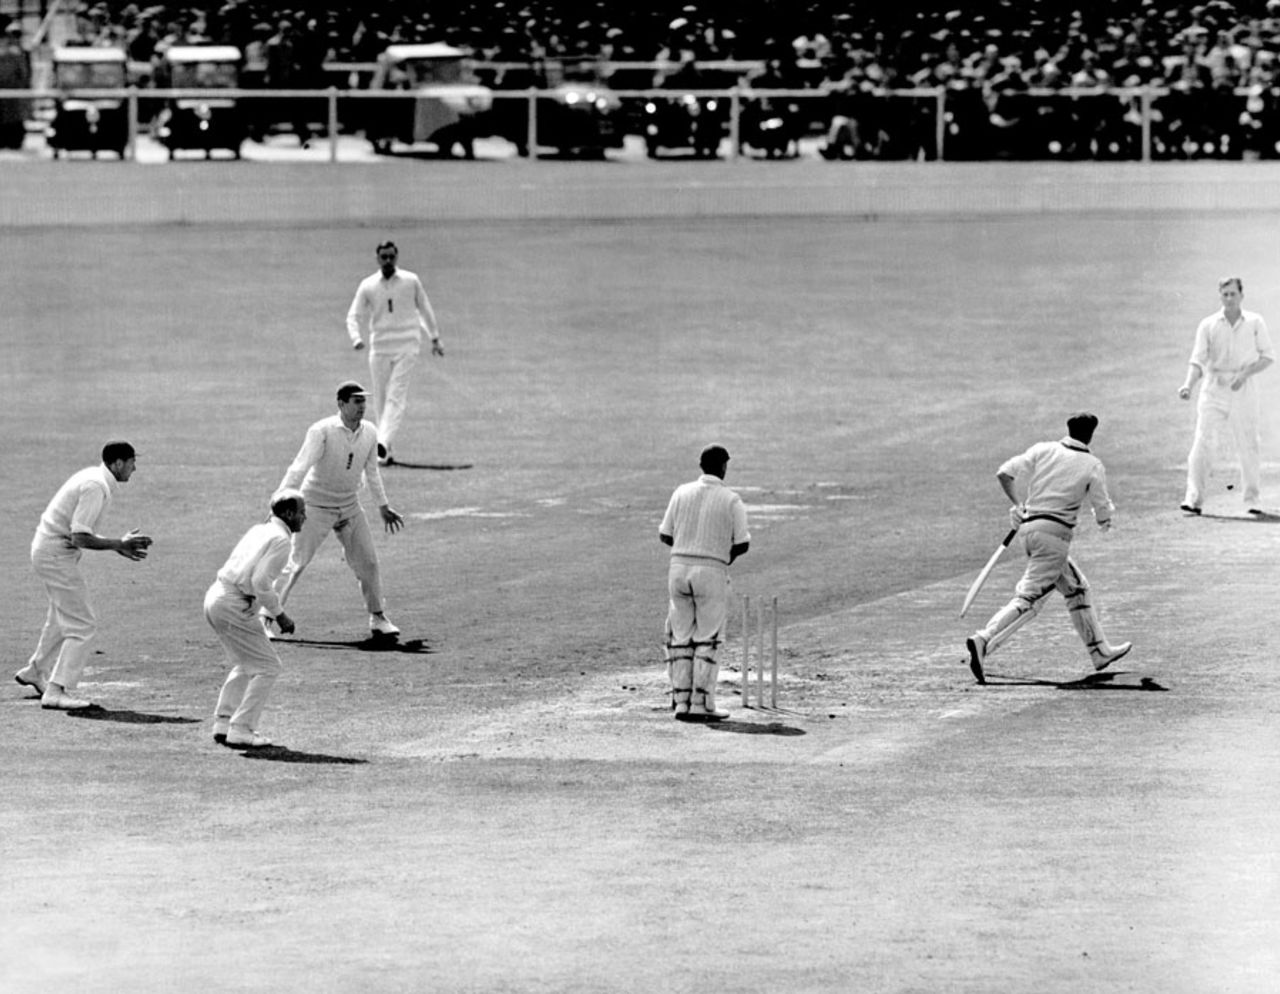 Keith Miller walks off after being bowled for a duck by Jim Laker, England v Australia, 4th Test, Old Trafford, 5th day, July 31, 1956